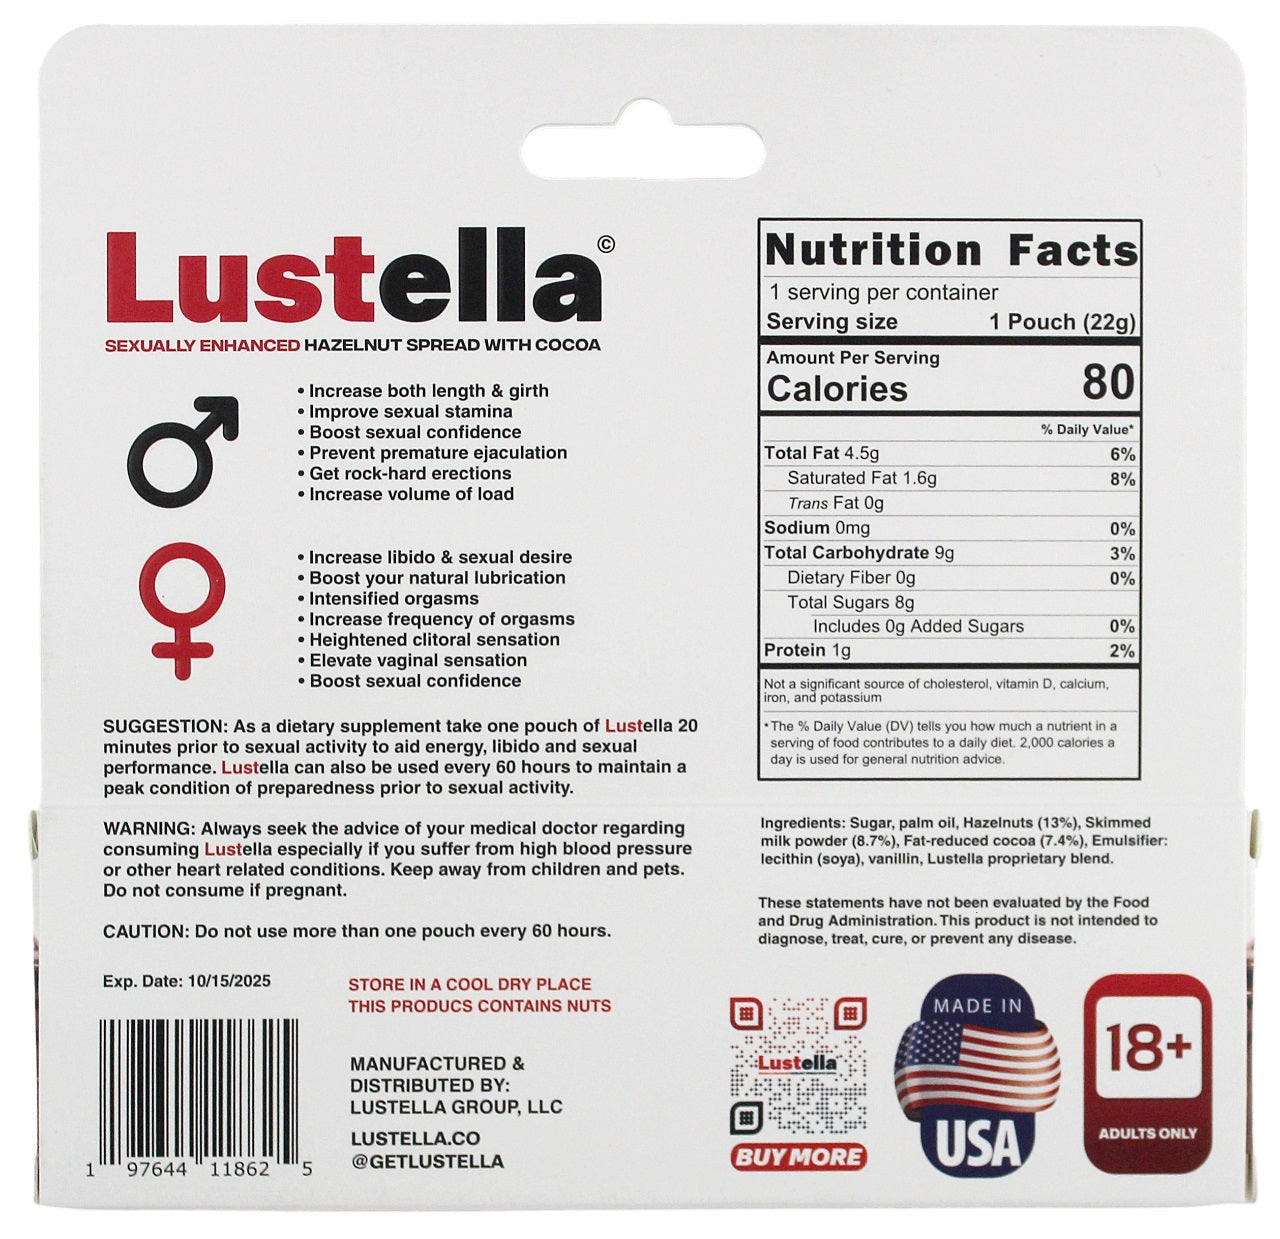 Lustella Sexually Infused Hazelnut Spread with Cocoa